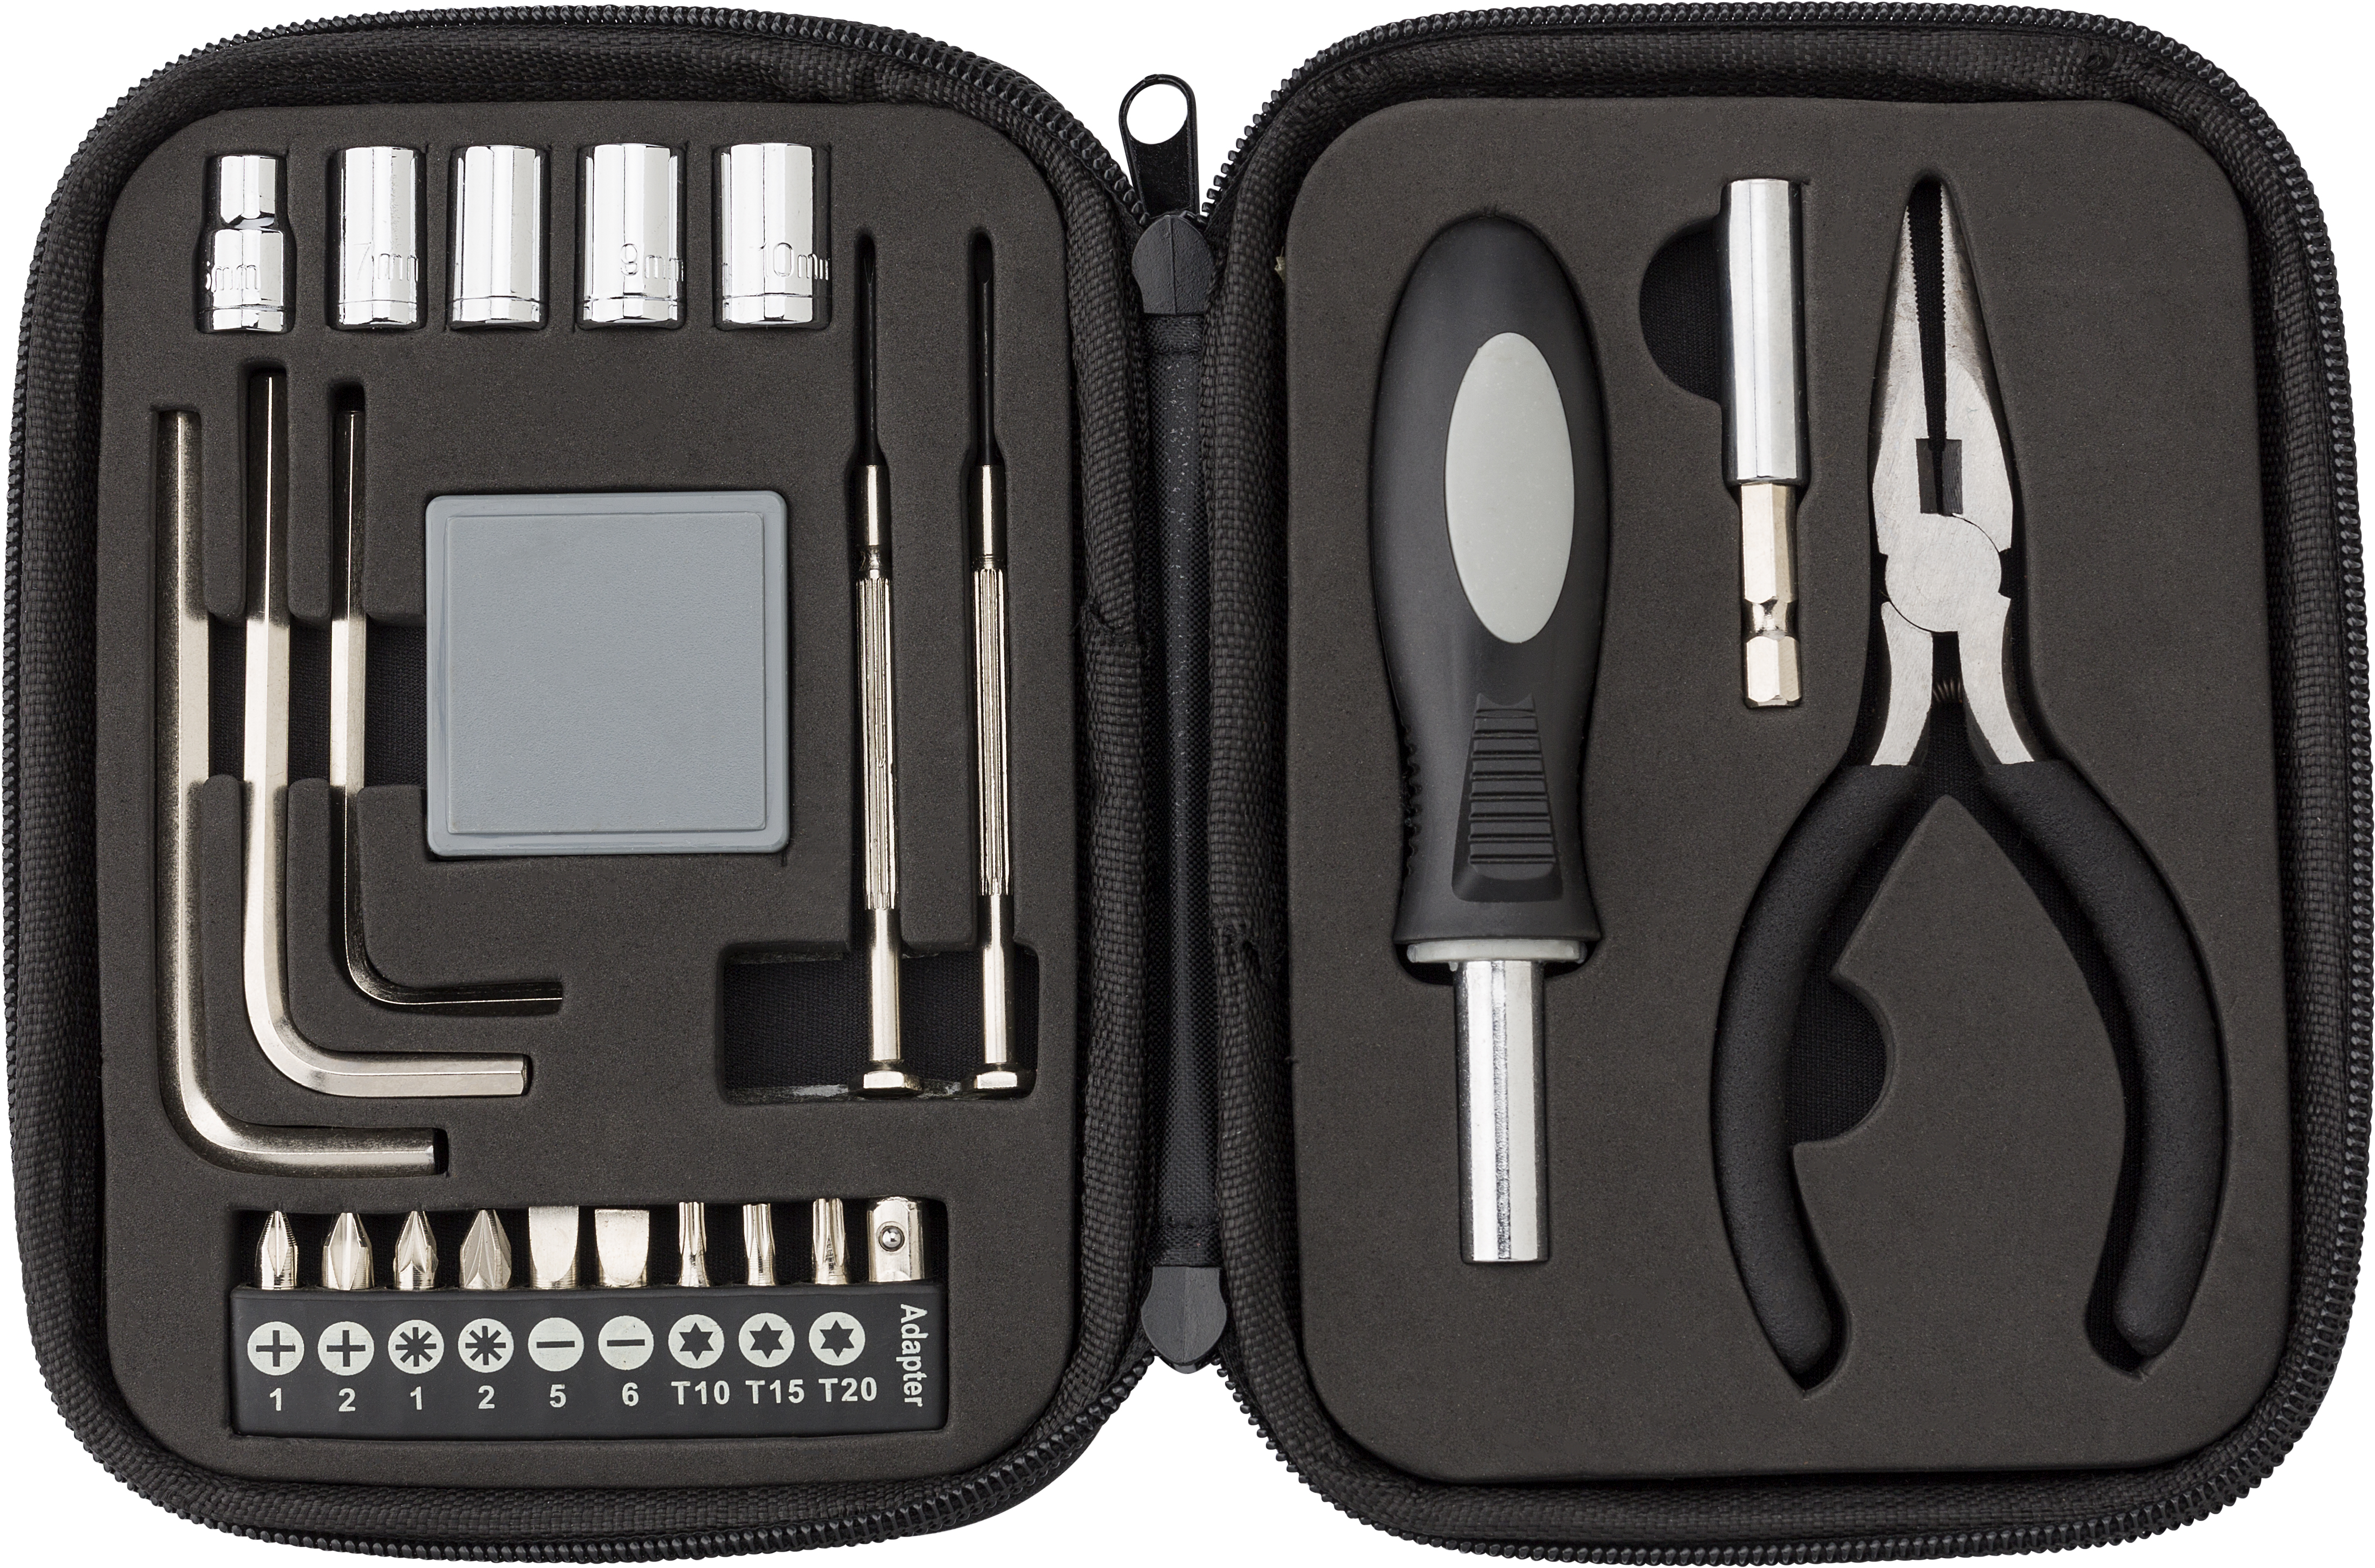 000000433300 001999999 2d090 ins pro01 2020 fal - Tool set in leather case (24pc)